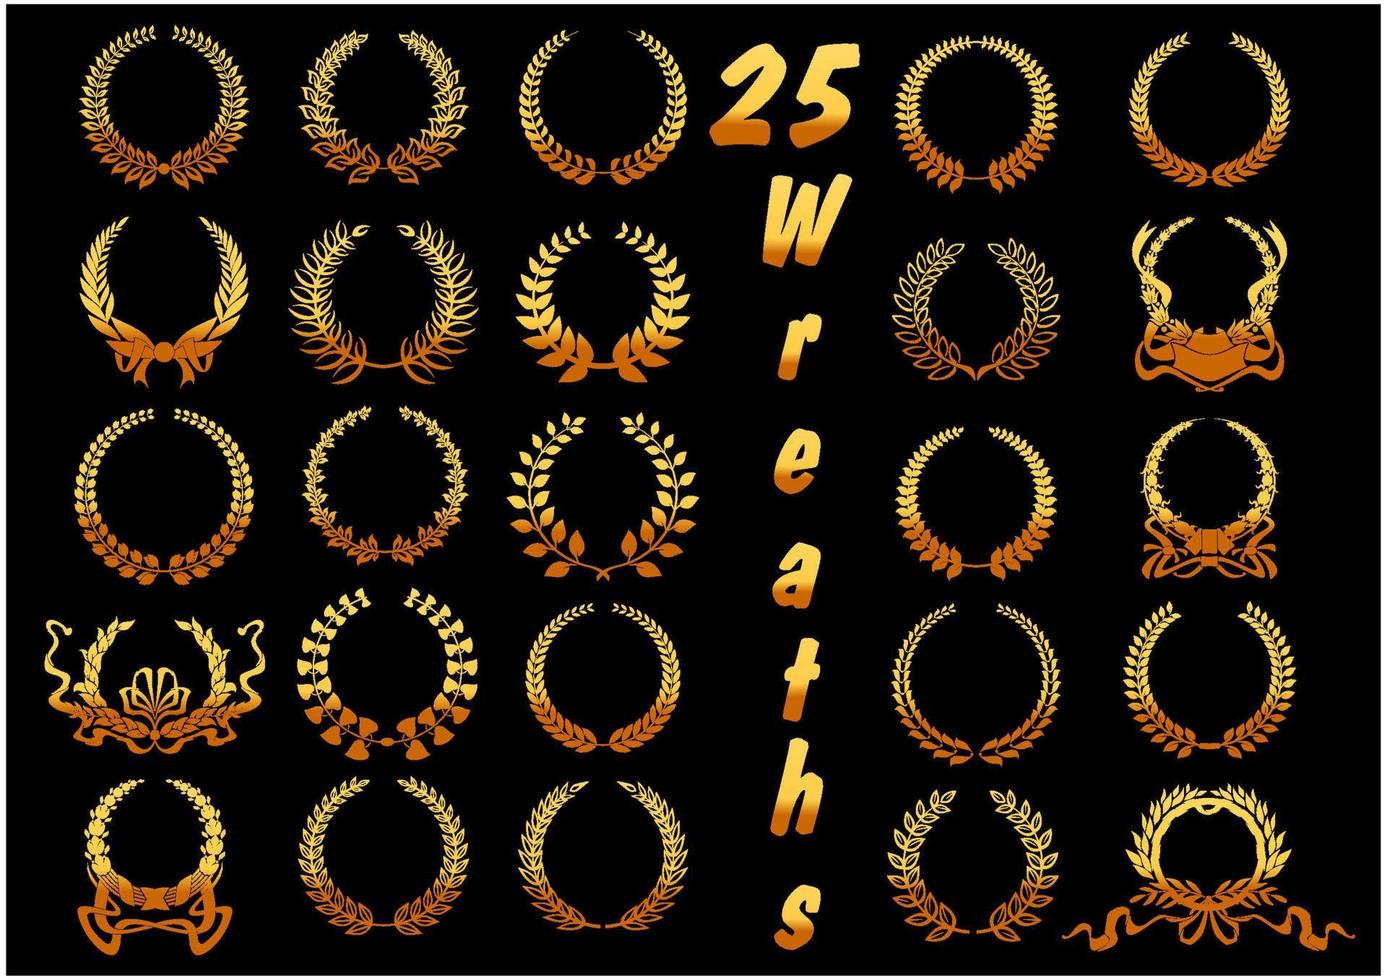 Golden laurel wreaths with ribbons and bows icons vector